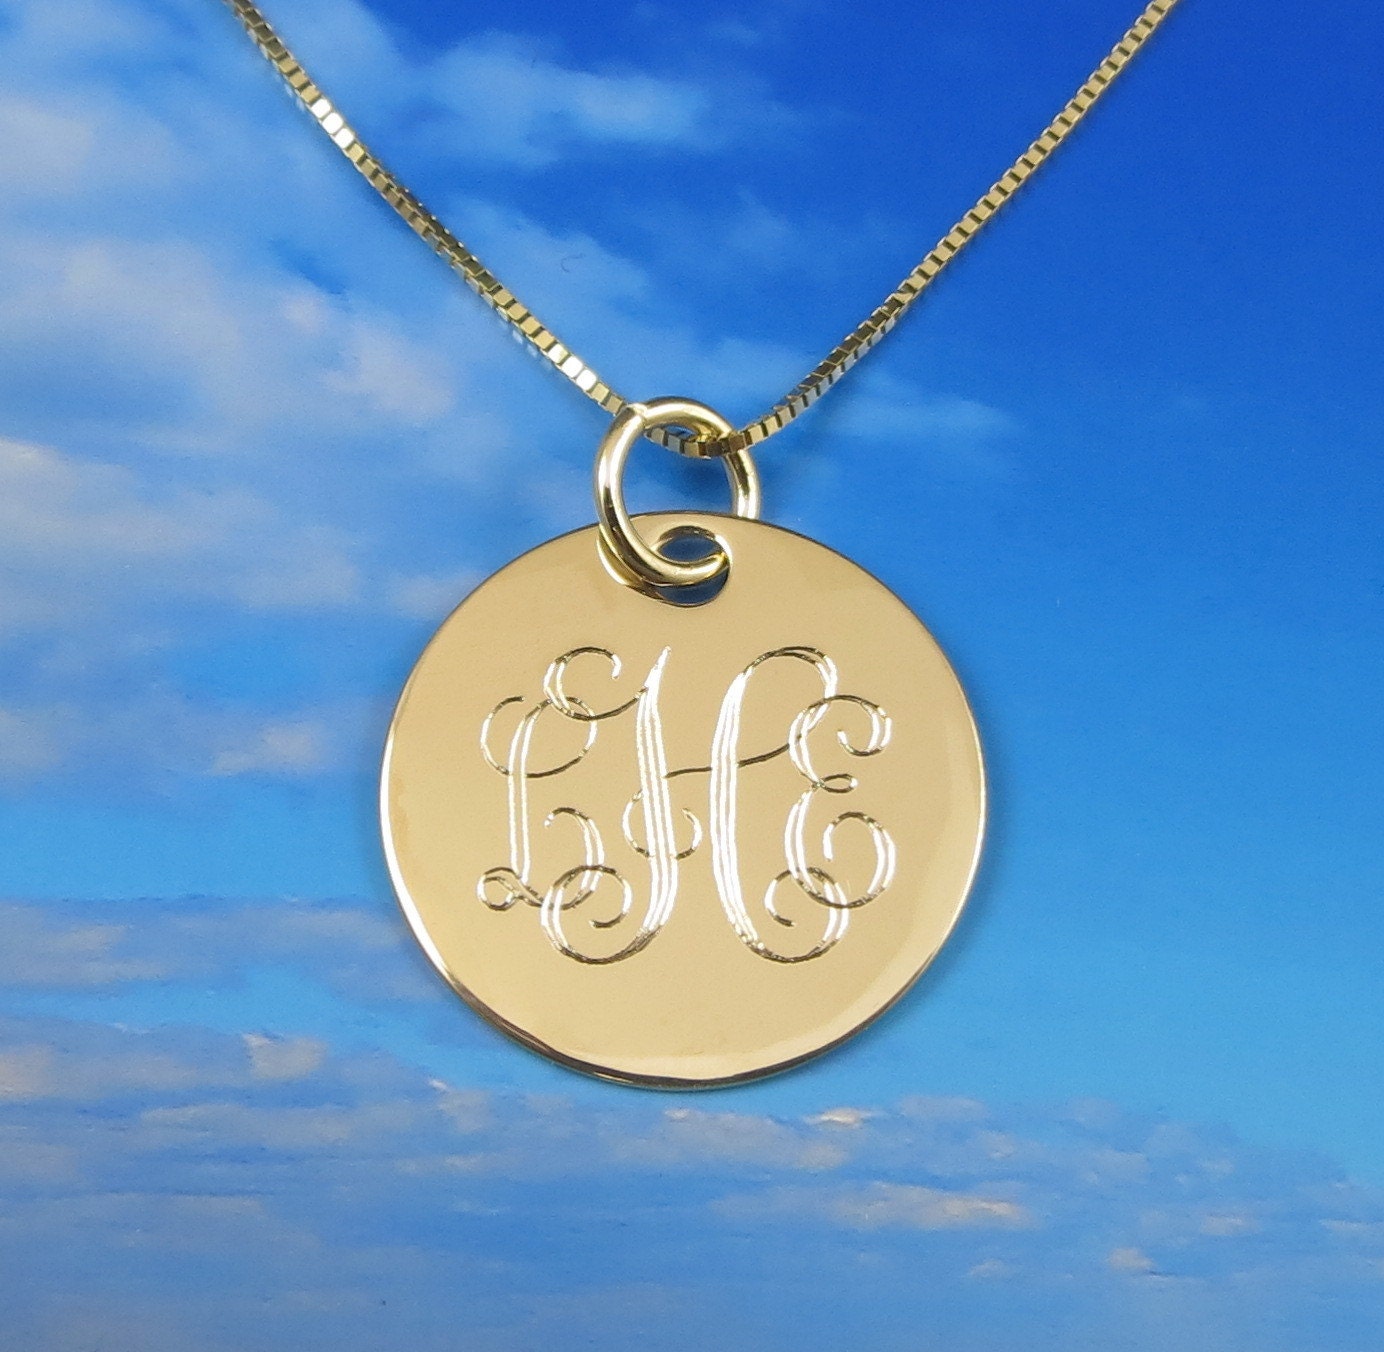 14K Solid Gold Engraved Personalized Monogram Necklace Pendant